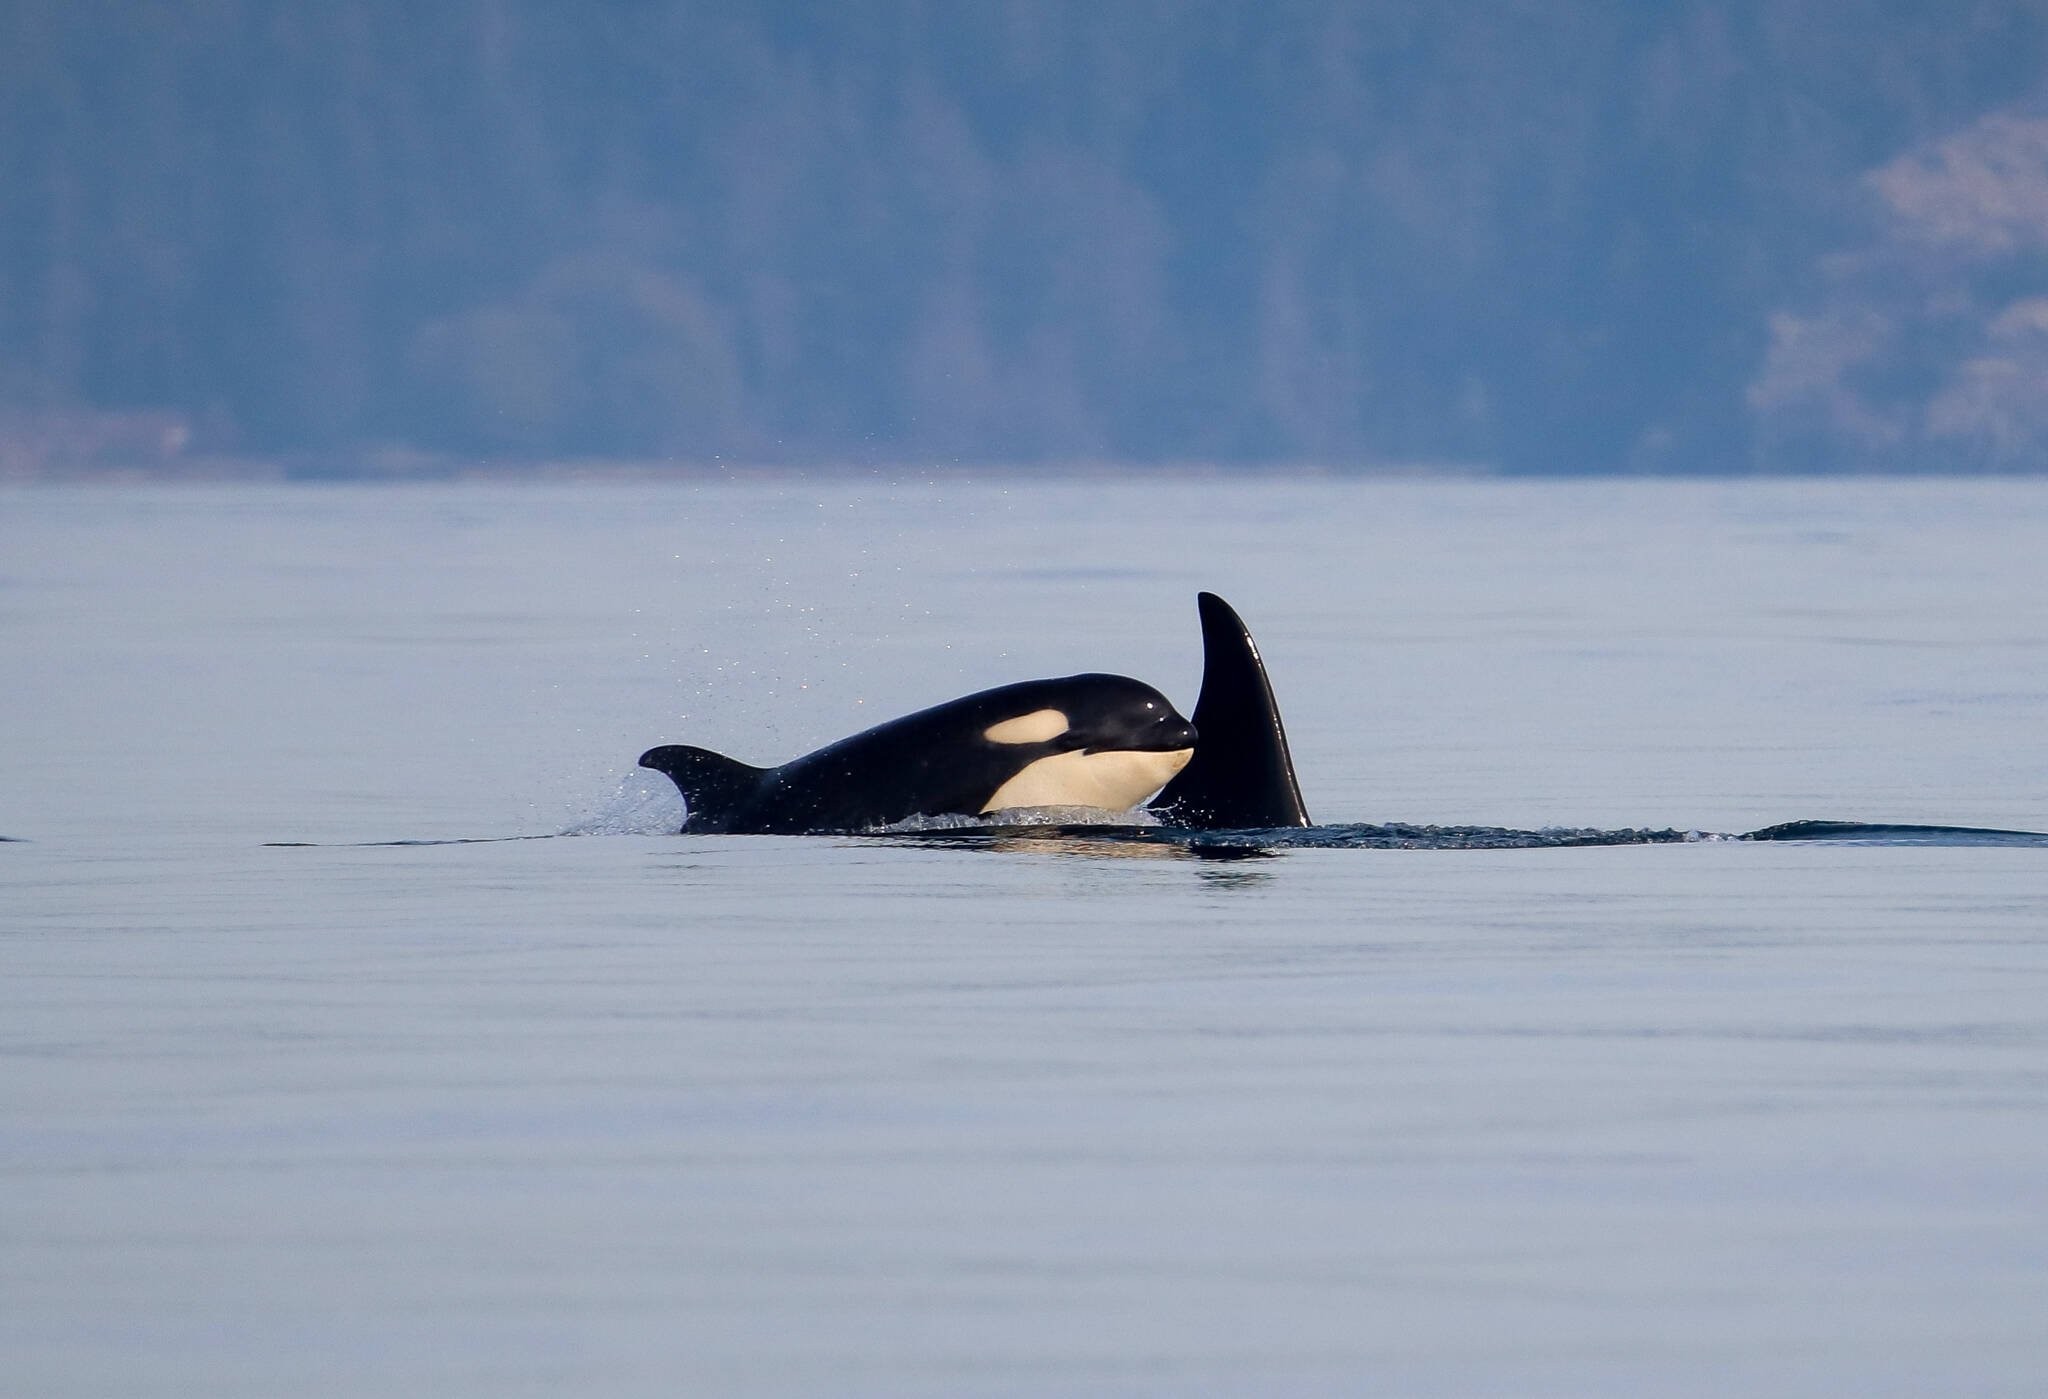 Southern resident orcas are the topic of this year’s Ways of Whales workshop, which is coming back to Coupeville. (Photo by Cindy Hansen/Orca Network)